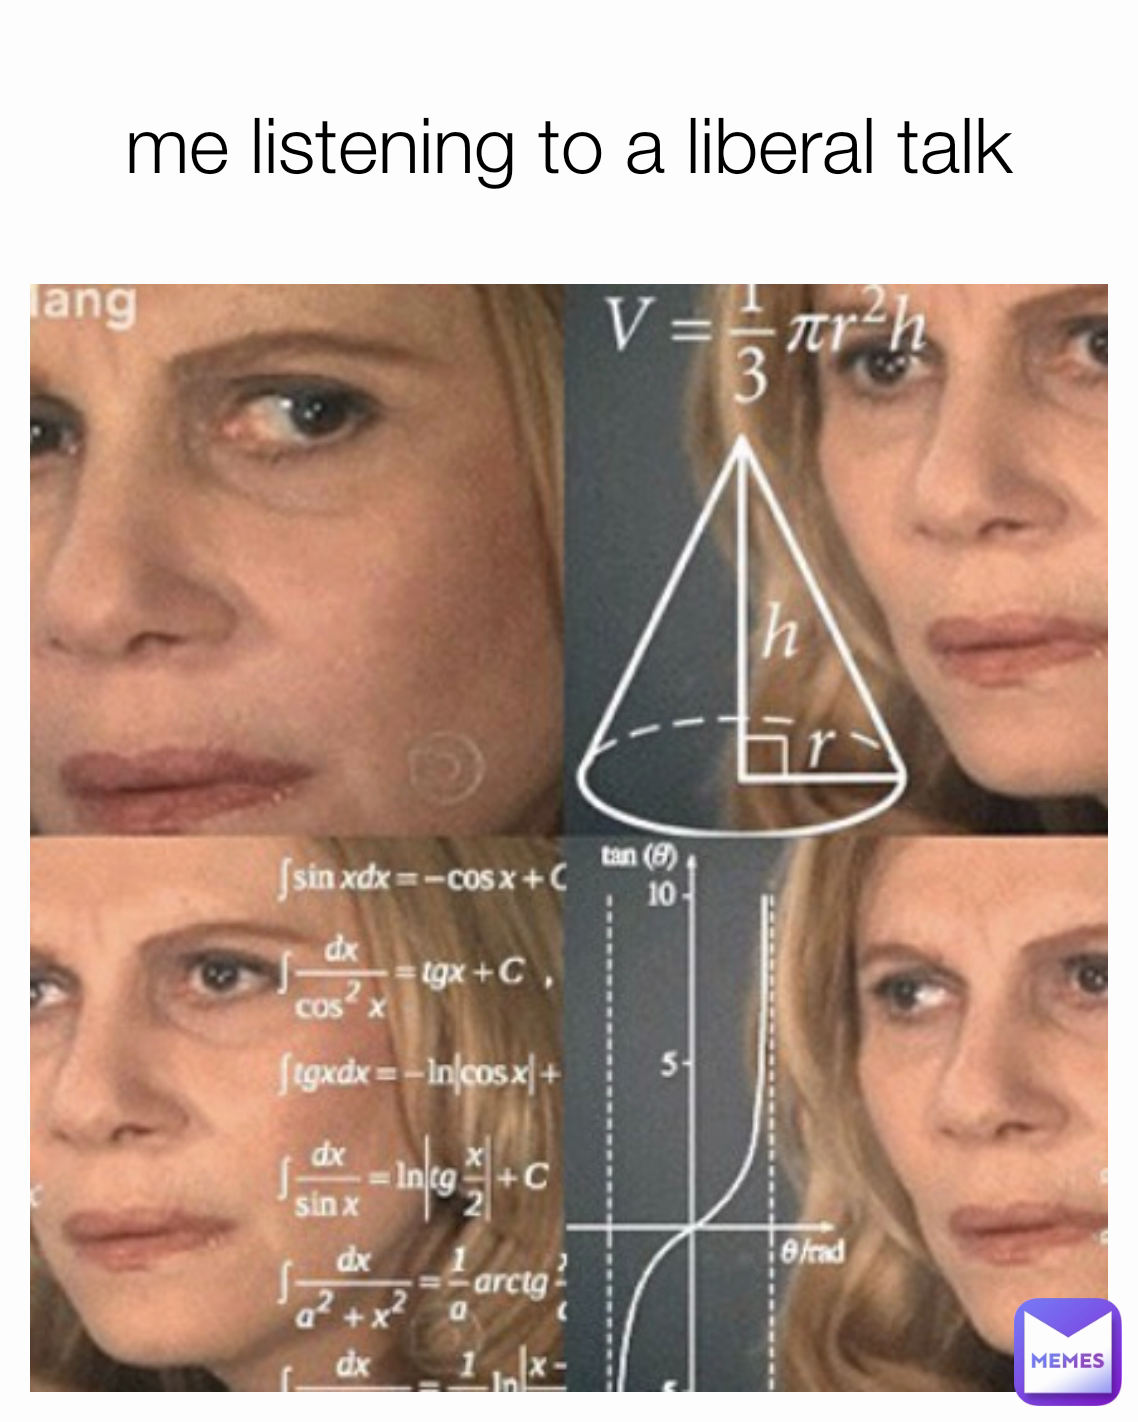 me listening to a liberal talk